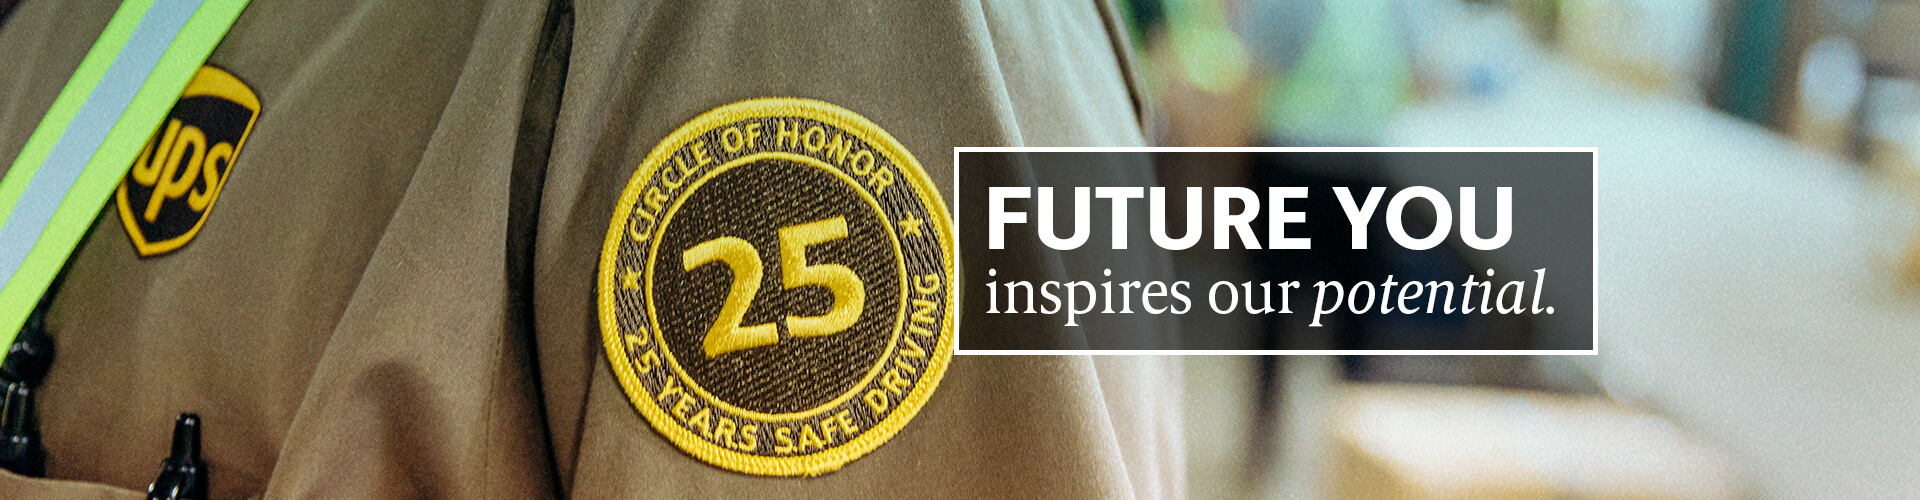 FUTURE YOU inspires our potential.